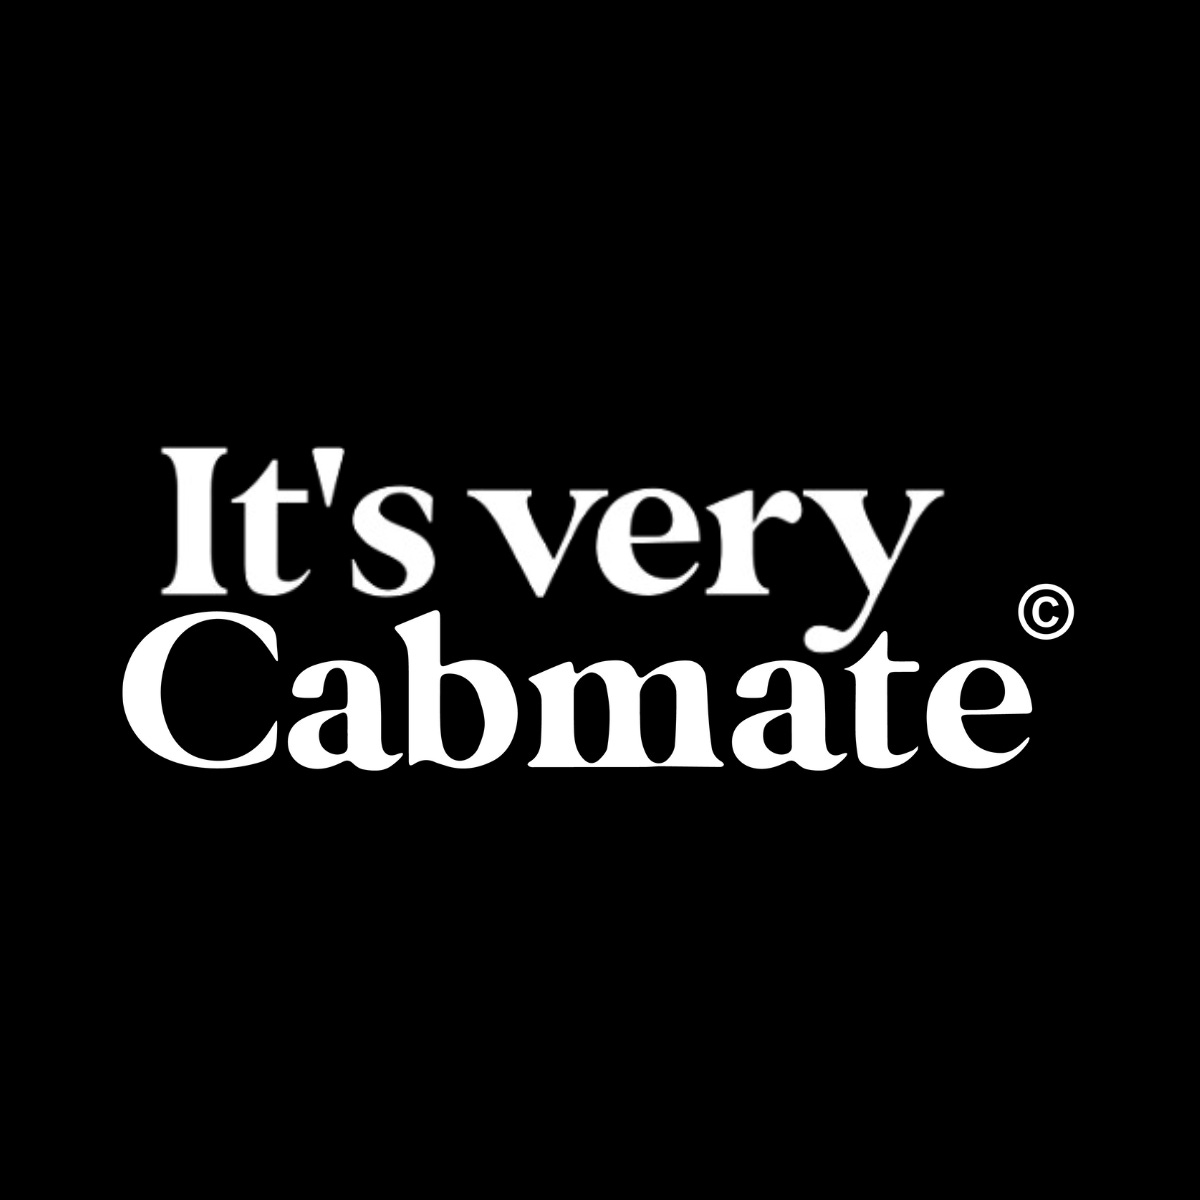 It's very Cabmate